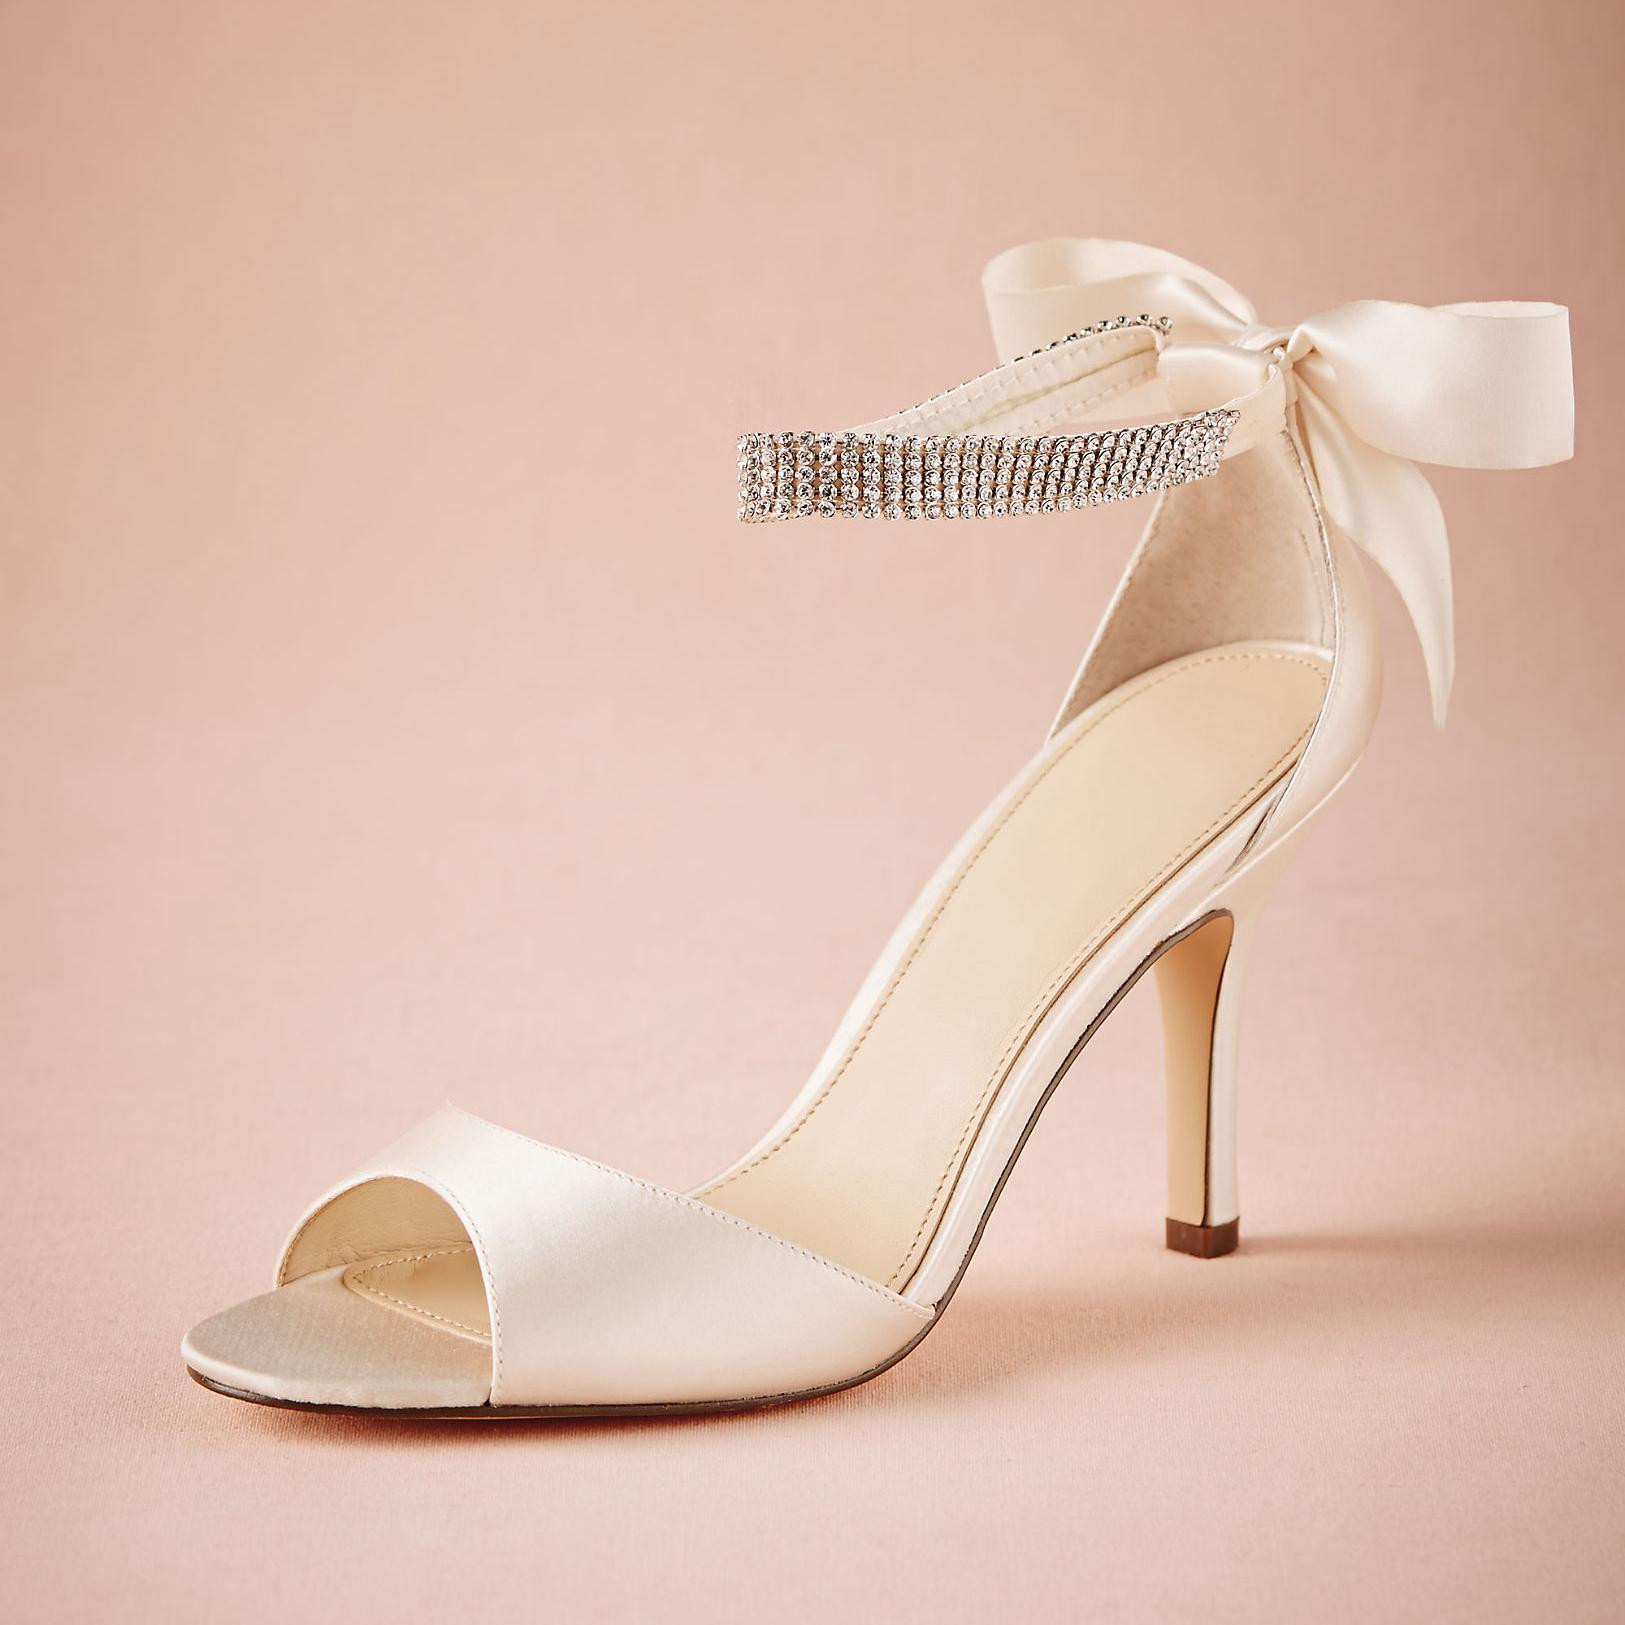 Wedding Shoes With Bows
 Ivory Satin Wedding Shoes Bowtie At Back Rhinestones Ankle